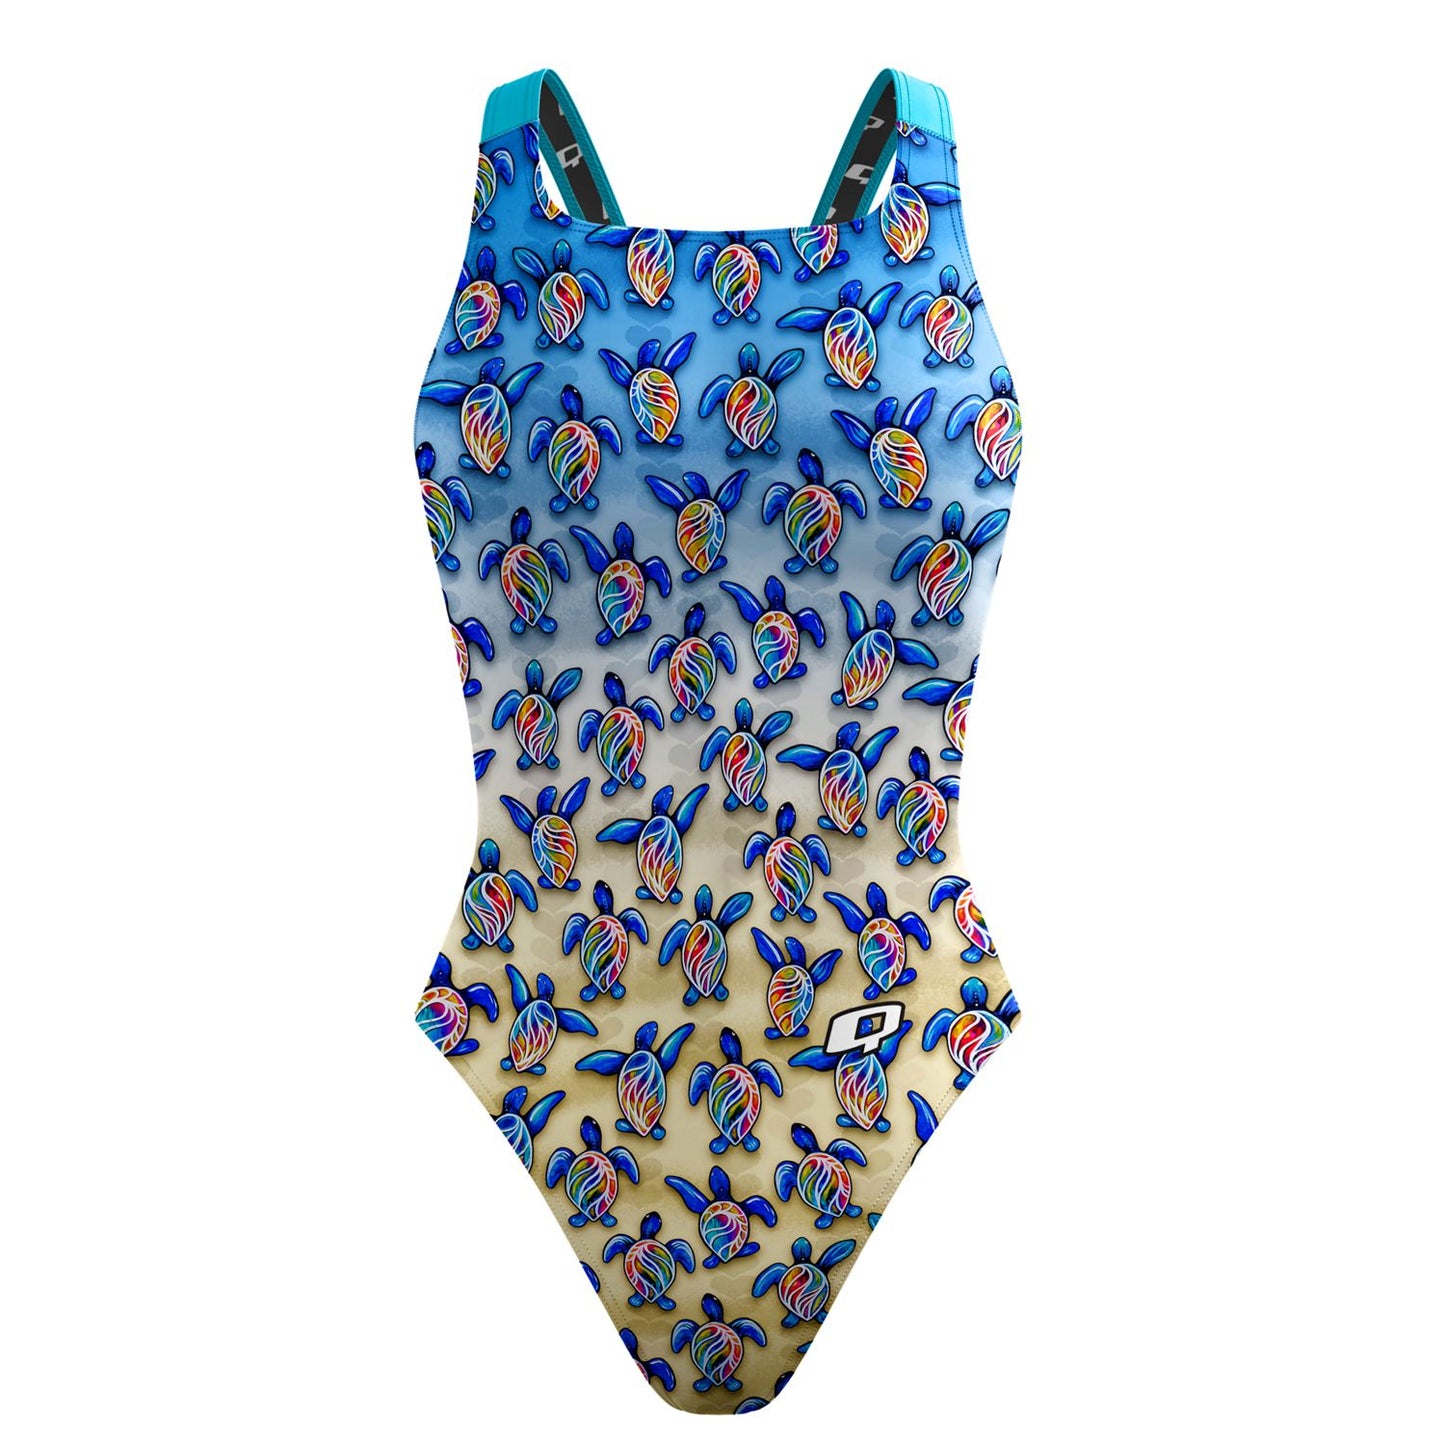 Turtle Trot Classic Strap Swimsuit